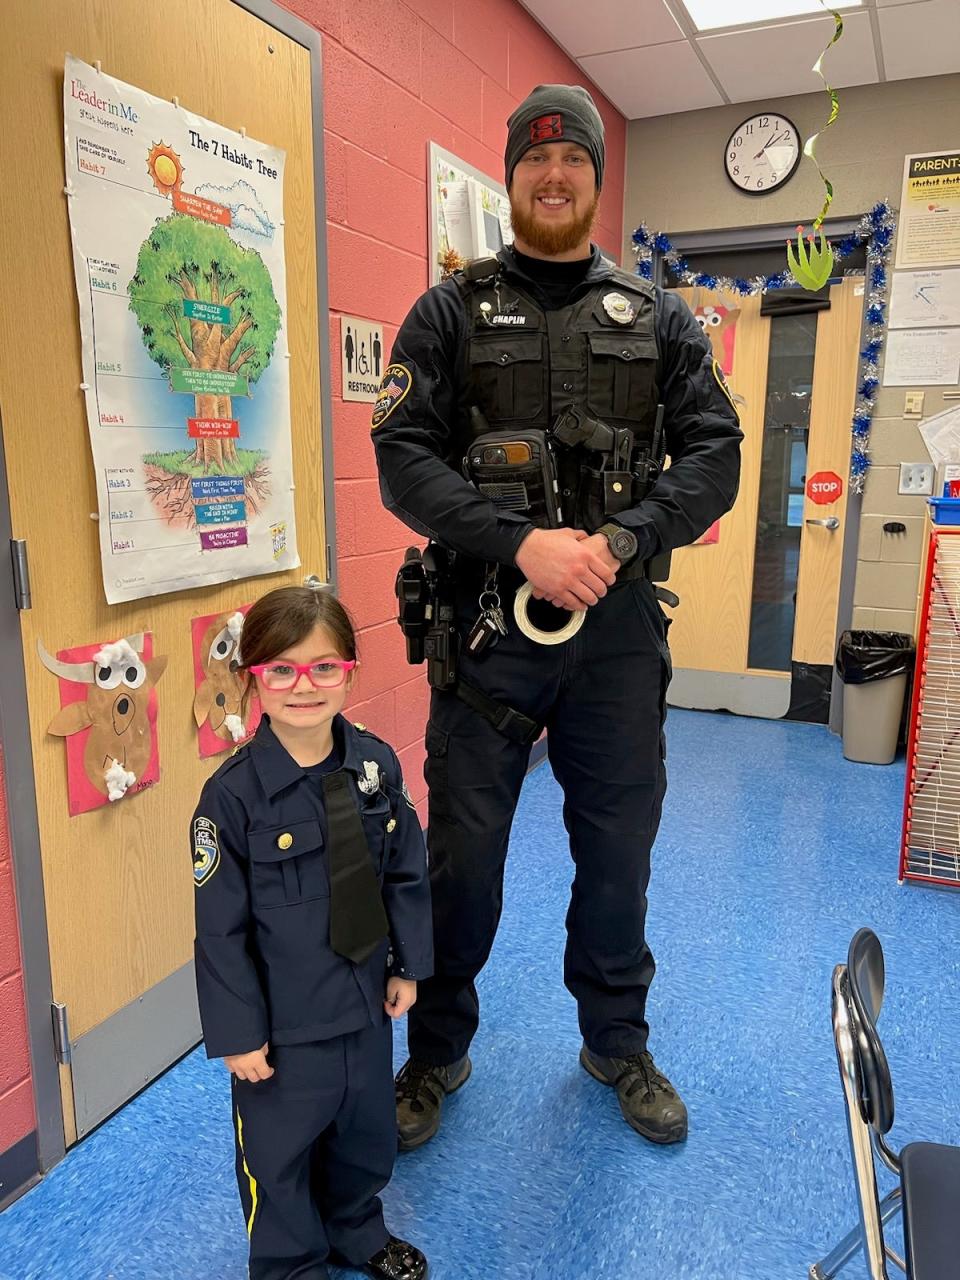 Members of the Galion Police Department helped kick off Safety Week this month at Galion Primary School as students were encouraged to dress up as a first responder or community helper.